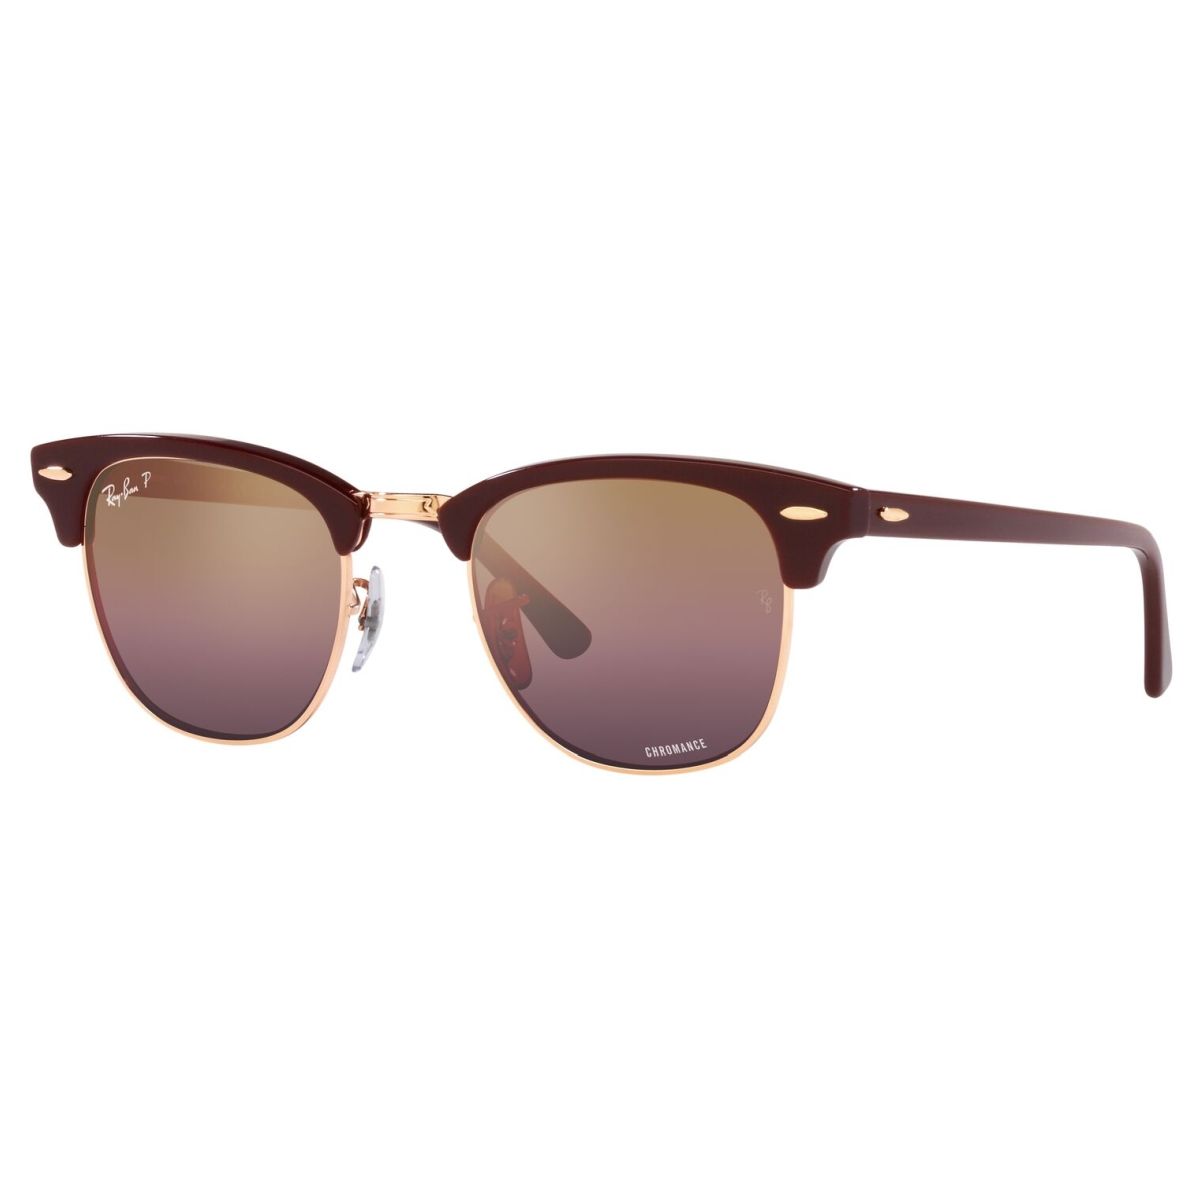 RAY-BAN CLUBMASTER 3016/1365G9/51